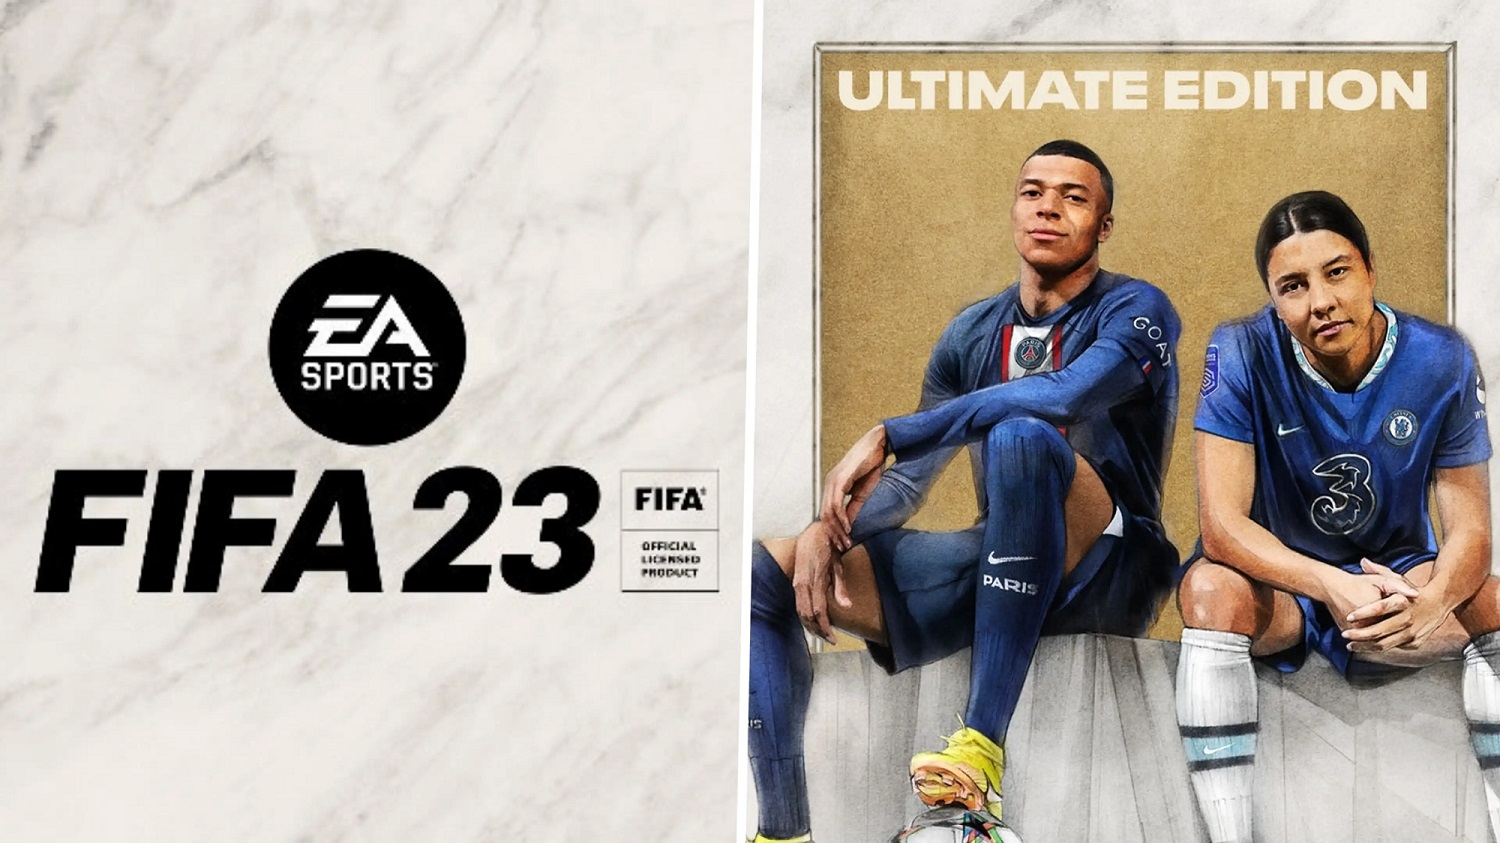 FIFA 23 ps4 coins: Understanding the Importance of customer service